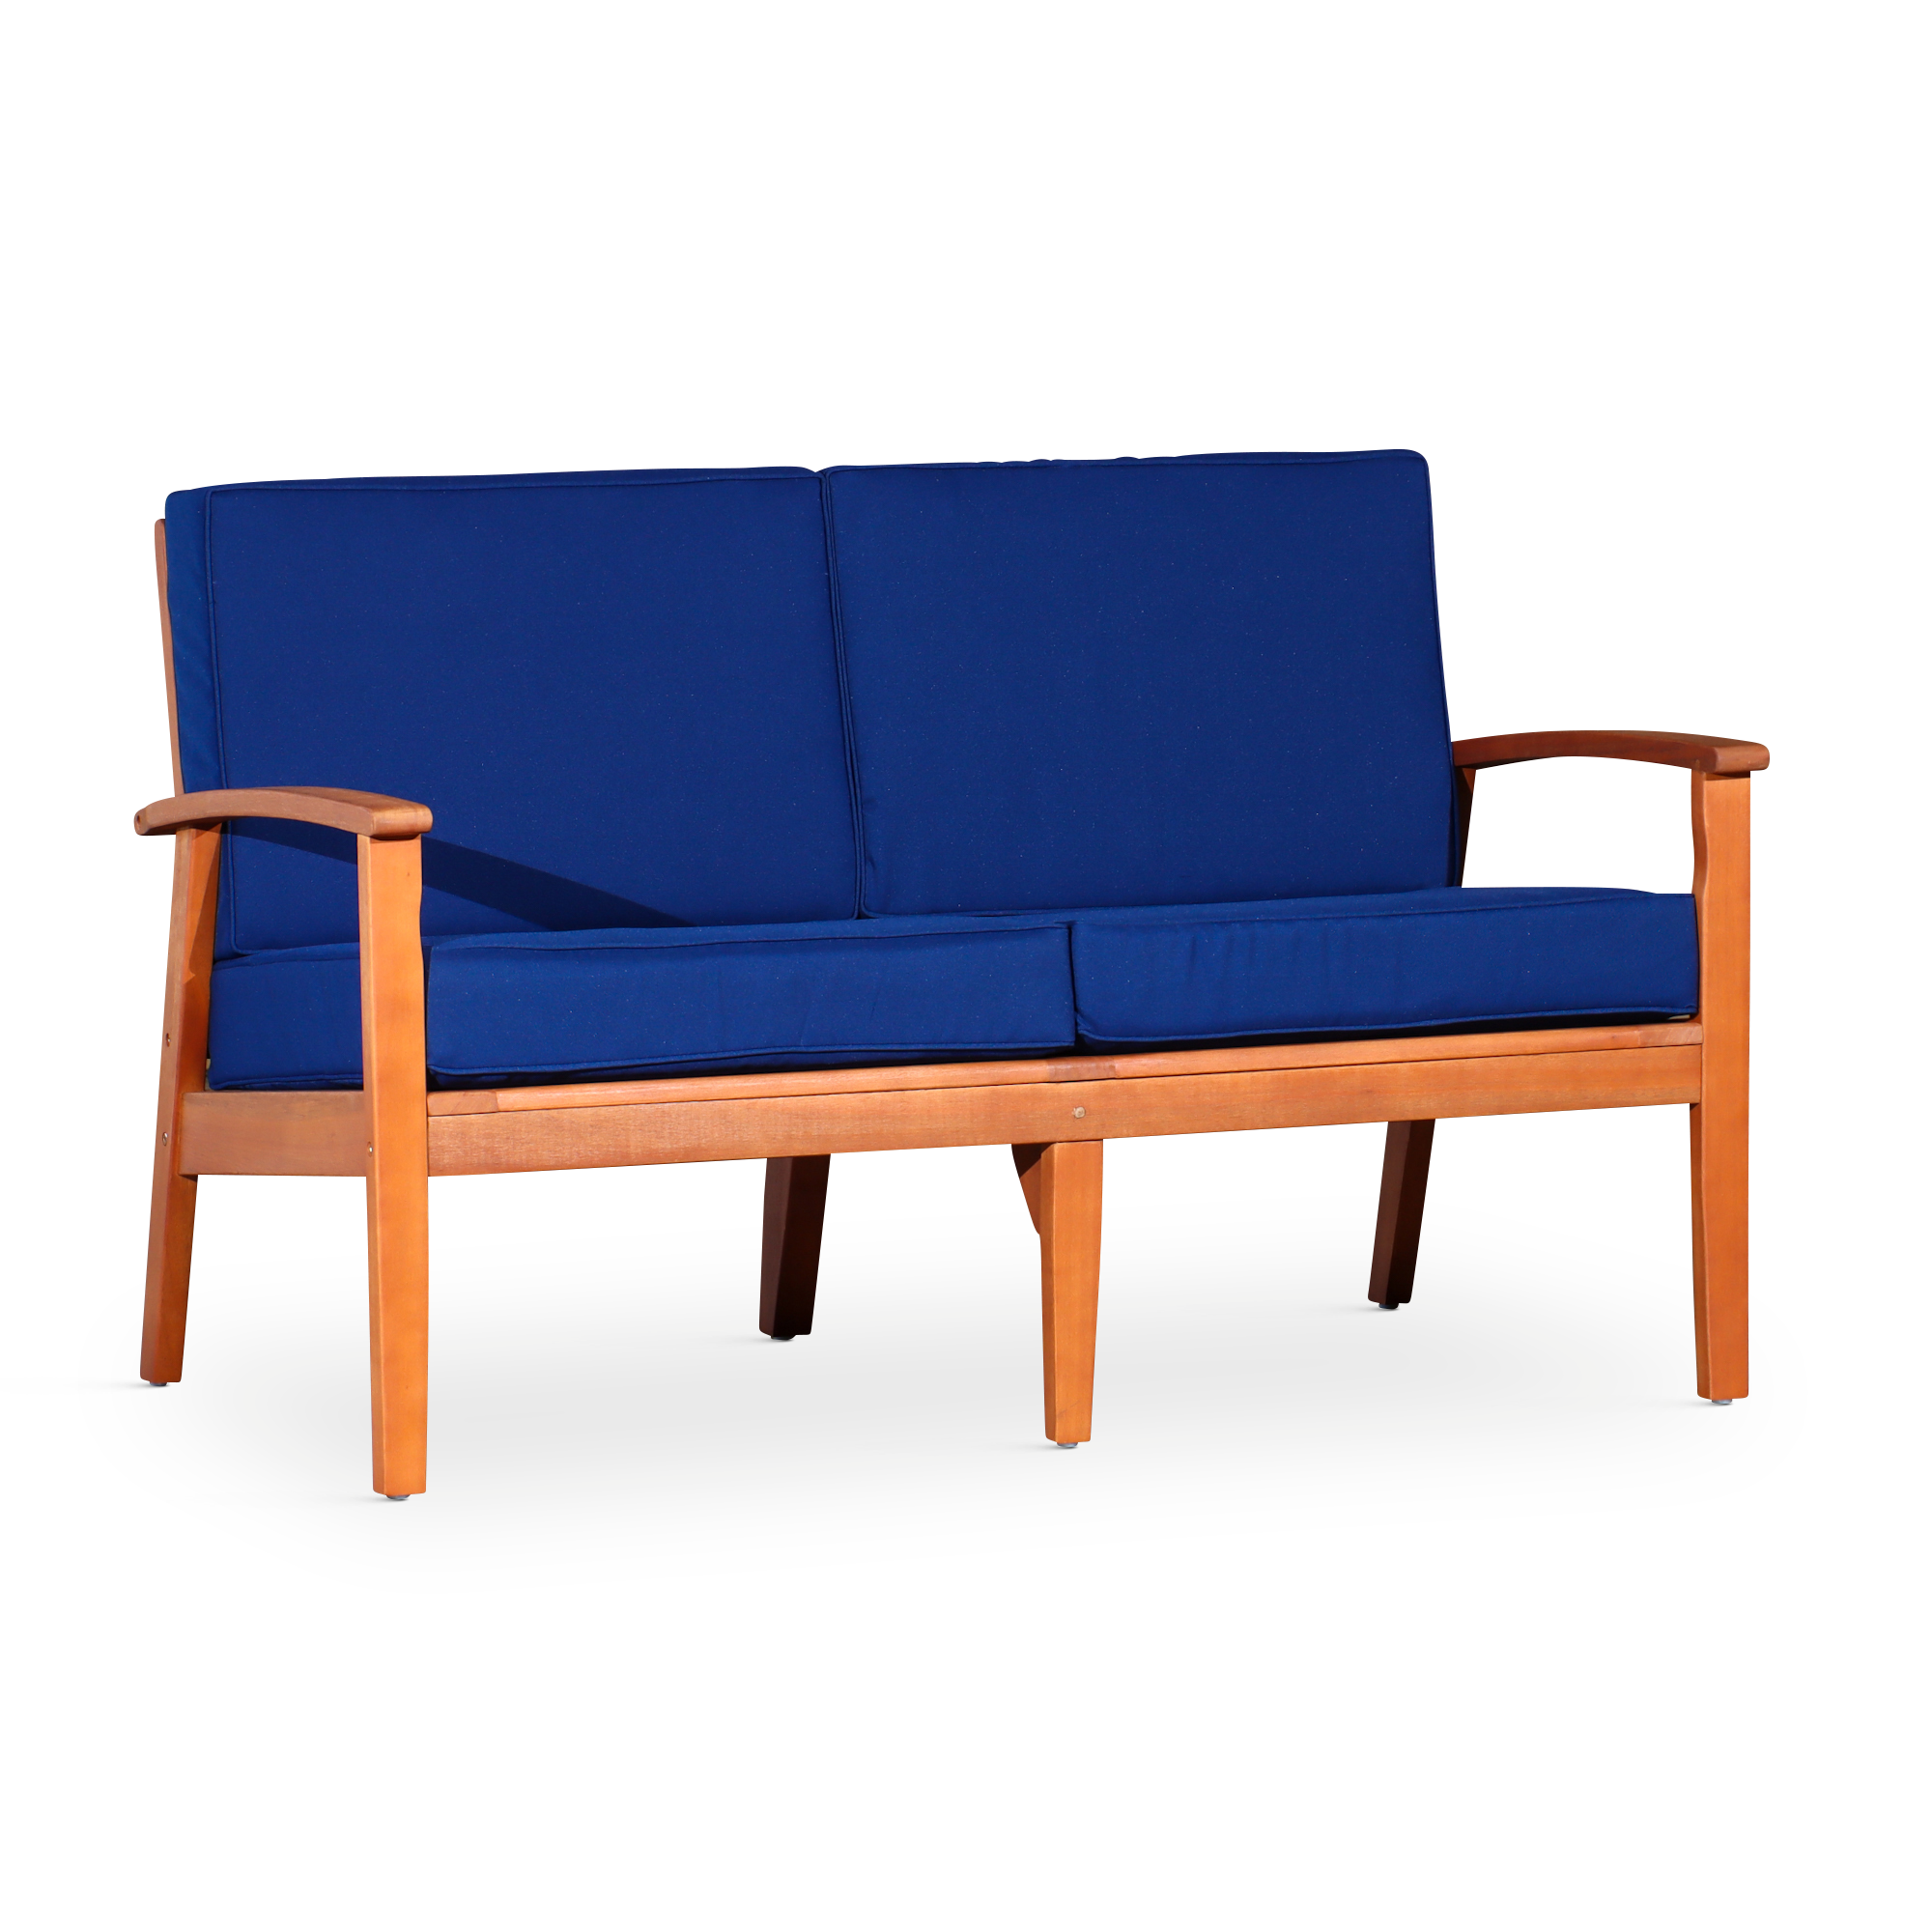 Eucalyptus-Loveseat-with-Cushions,-Natural-Oil-Finish,-Navy-Cushions-Outdoor-Chairs